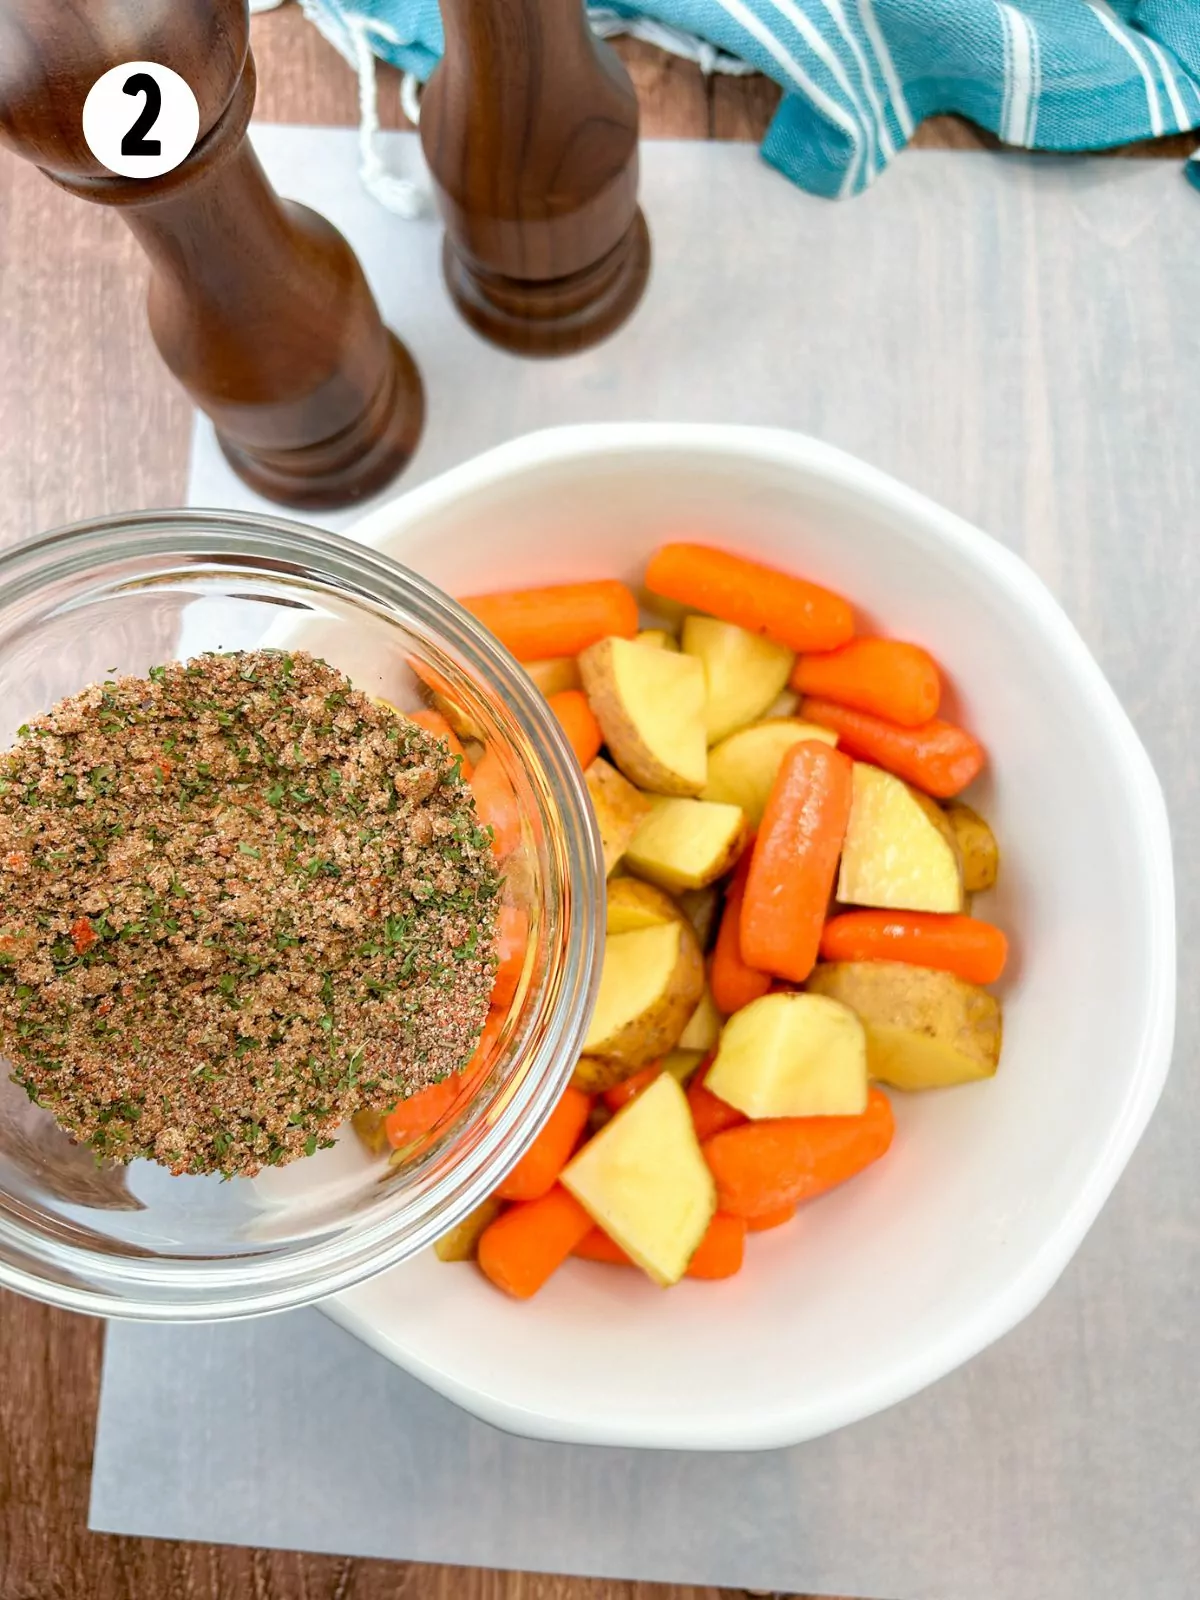 add seasoning mix to bowl of carrots and potatoes.